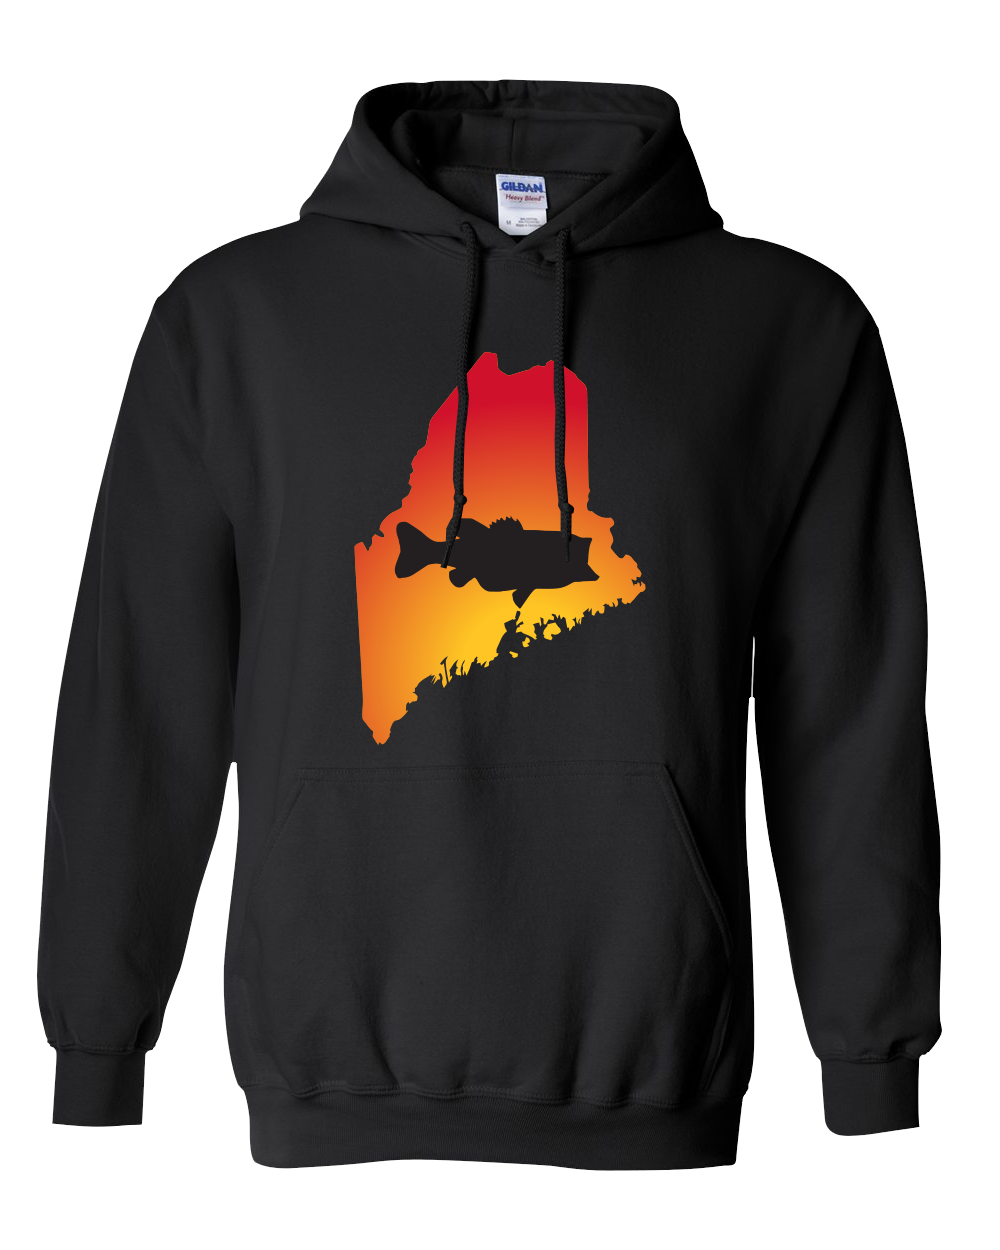 Pullover Hooded Sweatshirt Maine Black Large Mouth Bass Vibrant Design High Quality Tight Knit Ring Spun Low Maintenance Cotton Printed With The Newest Available Color Transfer Technology